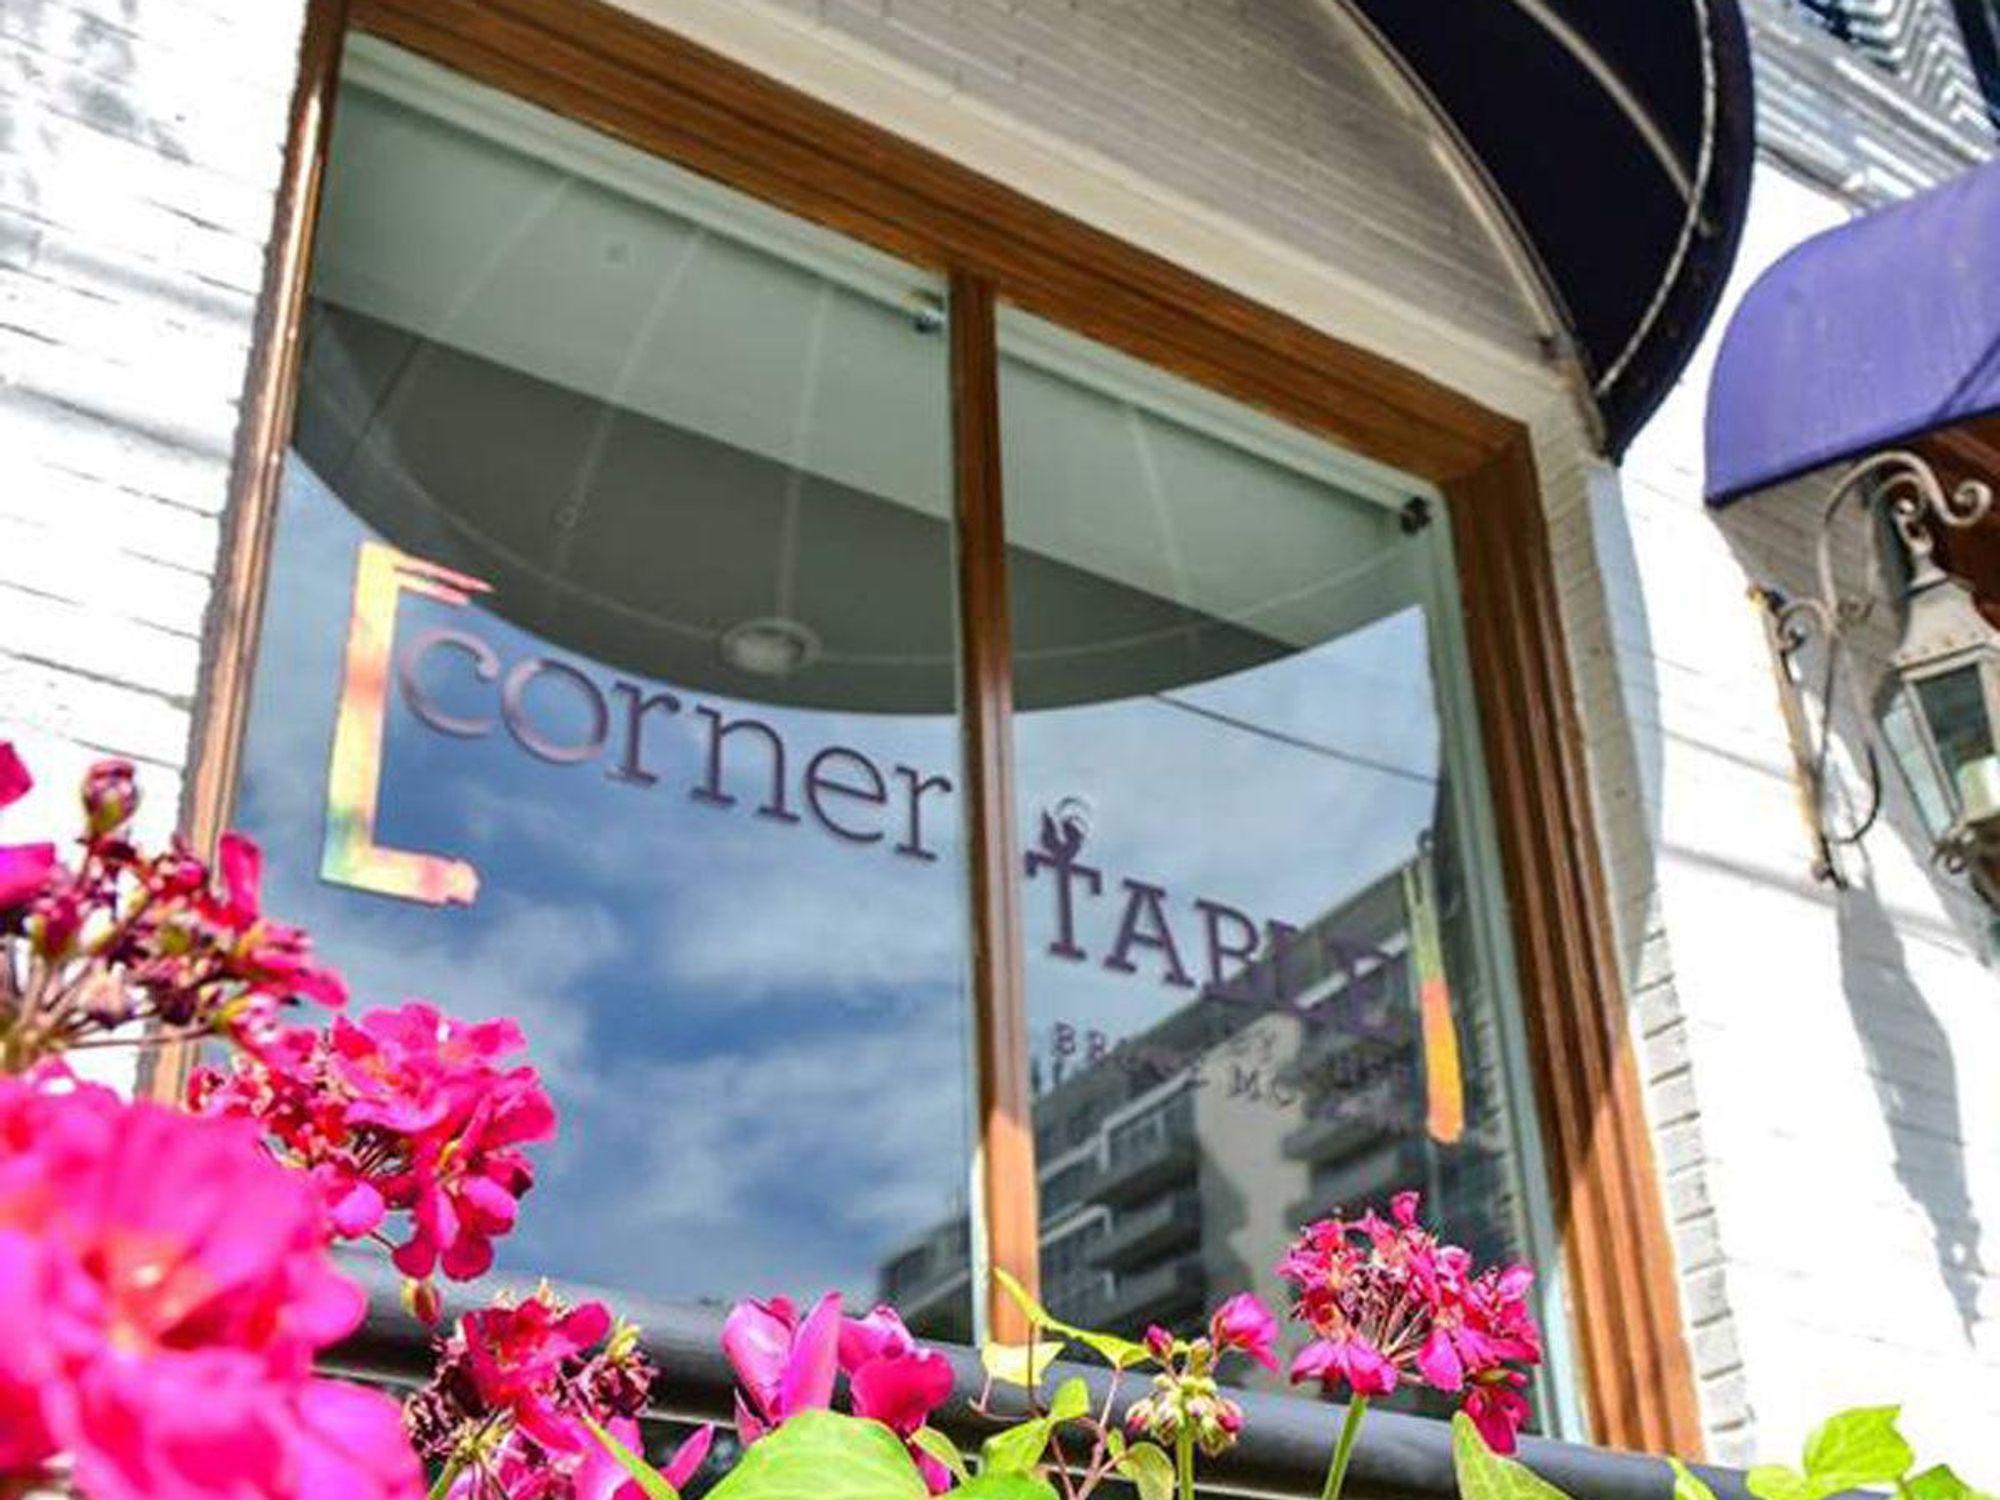 Corner Table exterior with sign and flowers